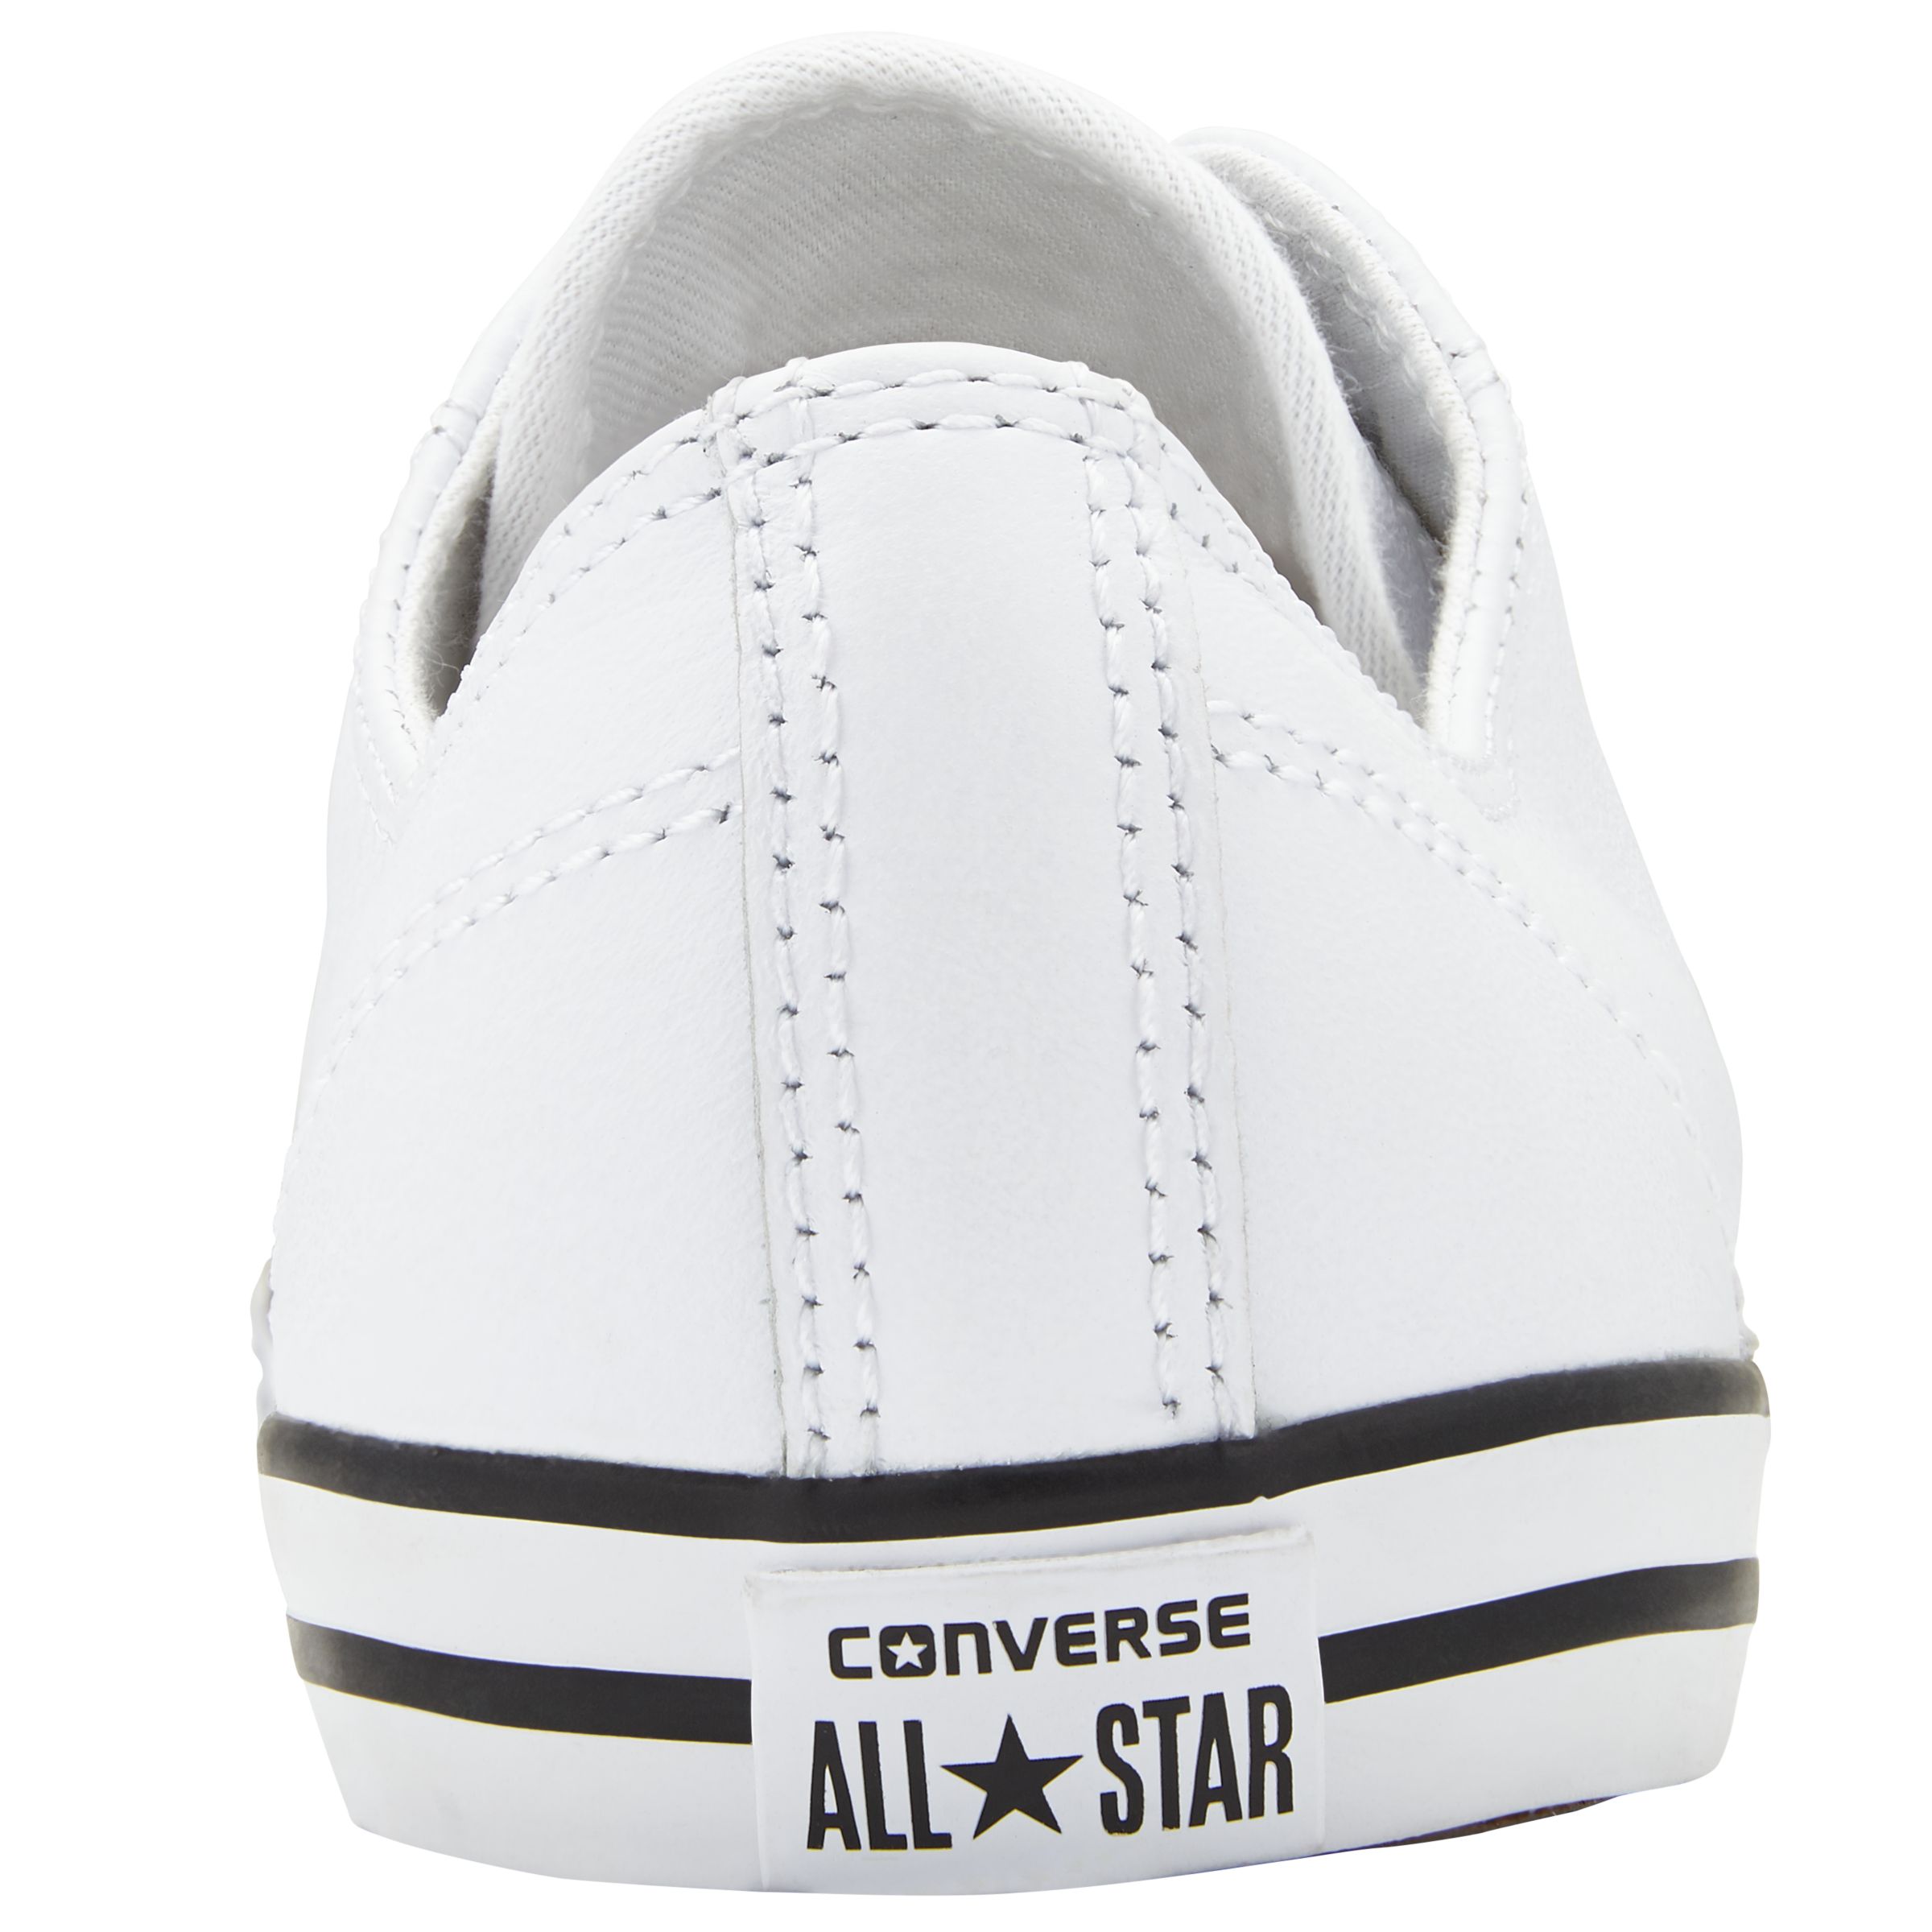 converse dainty leather white